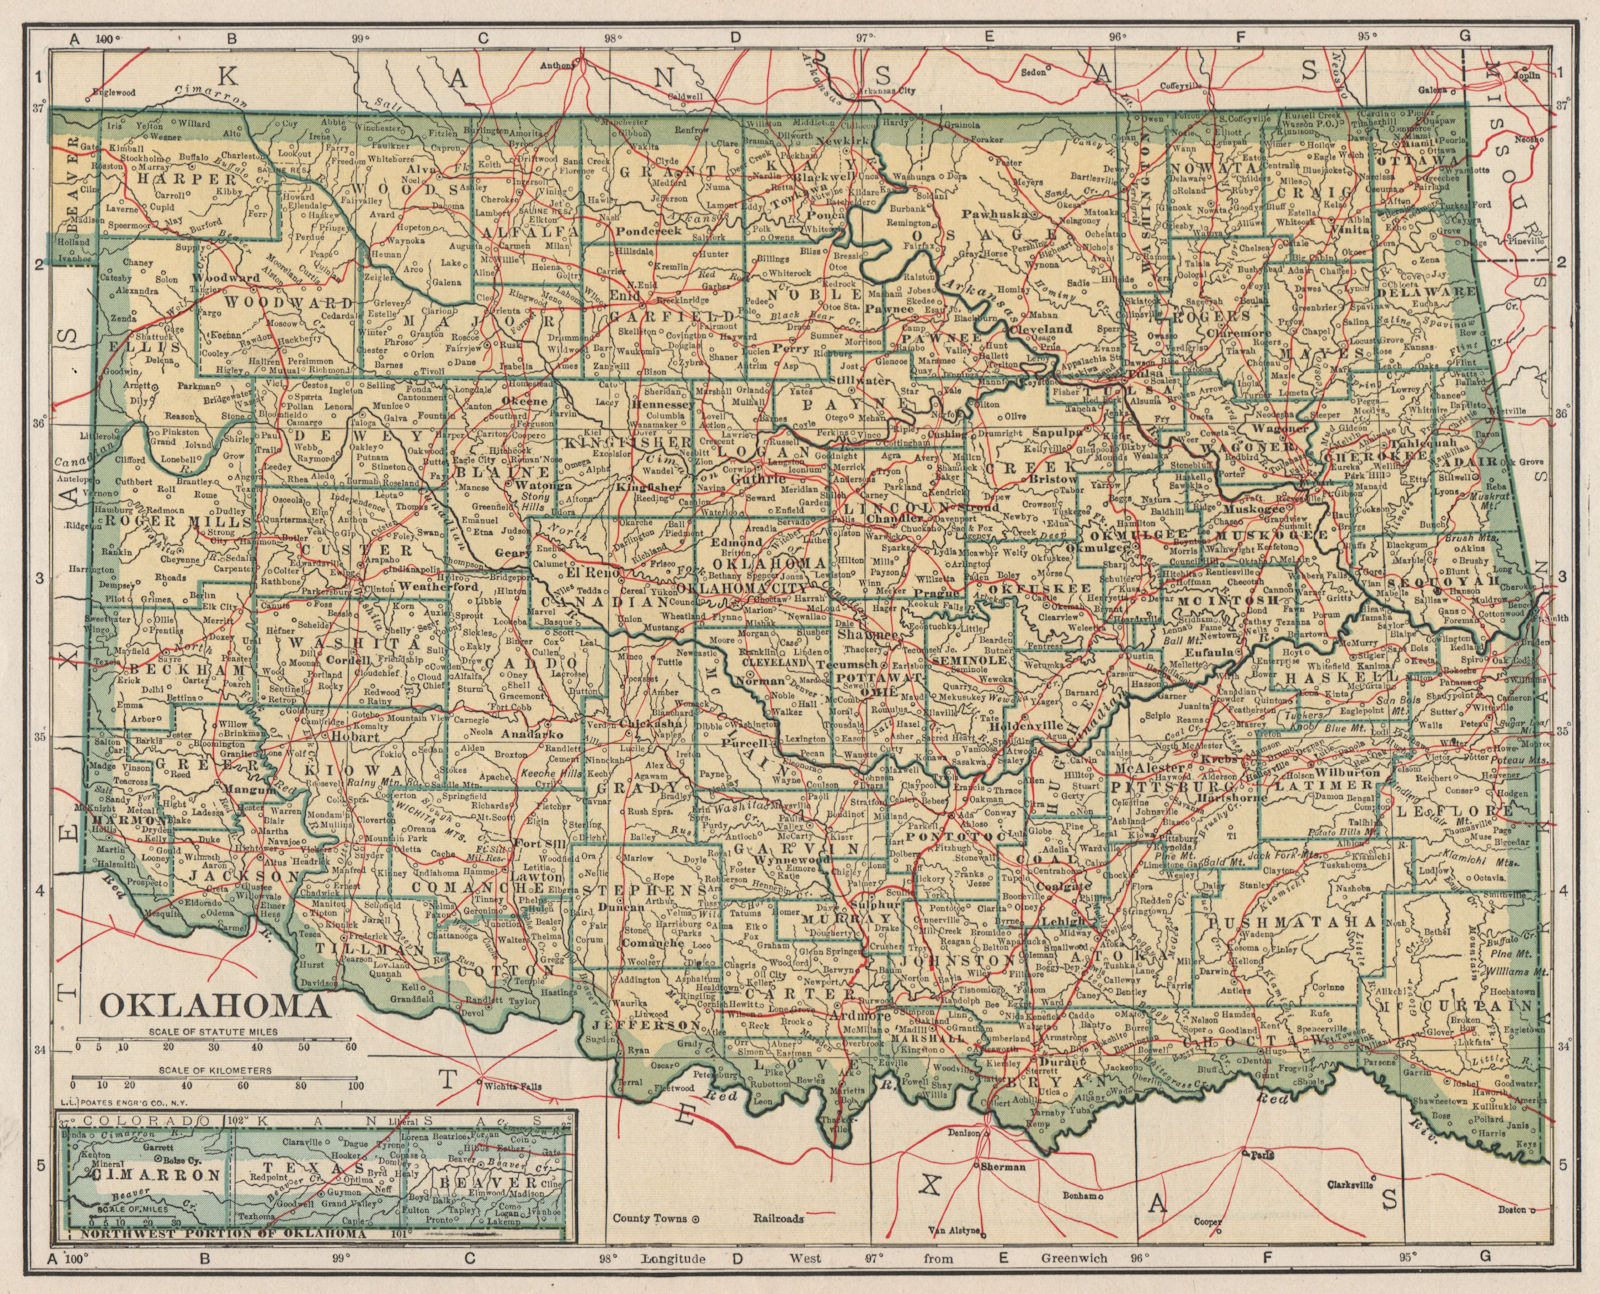 Oklahoma state map showing railroads. POATES 1925 old vintage plan chart